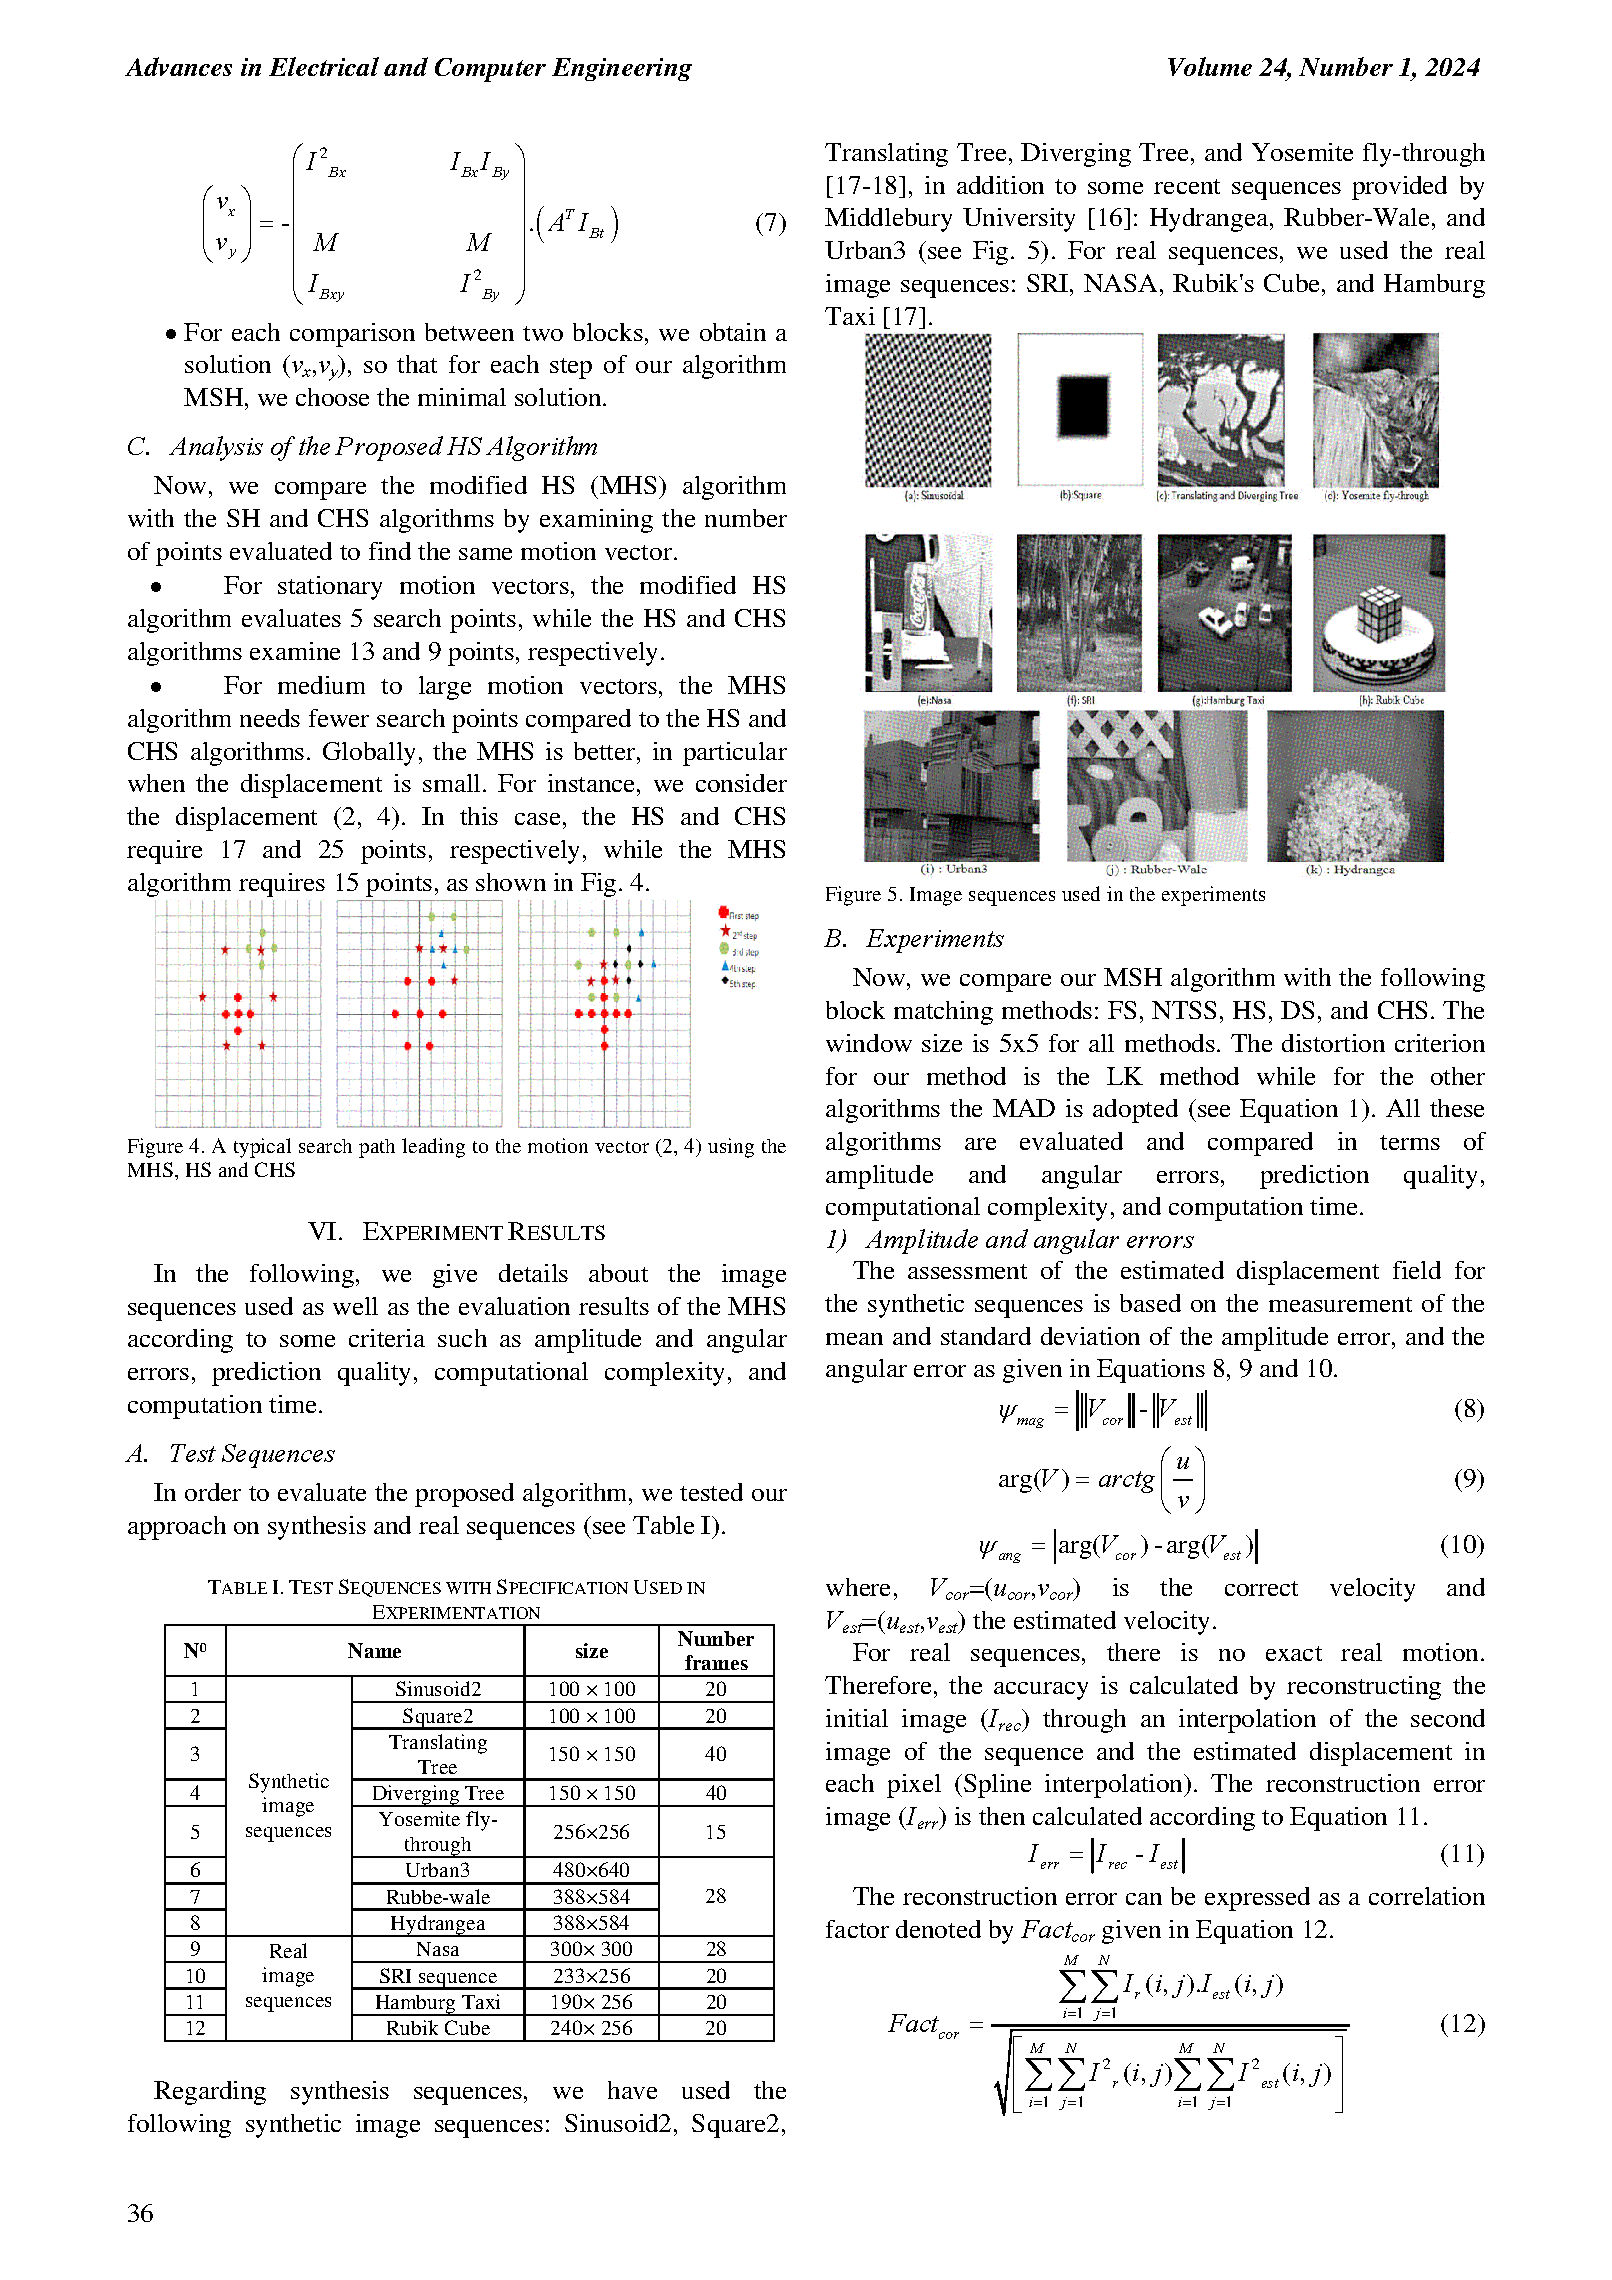 PDF Quickview for paper with DOI:10.4316/AECE.2024.01004